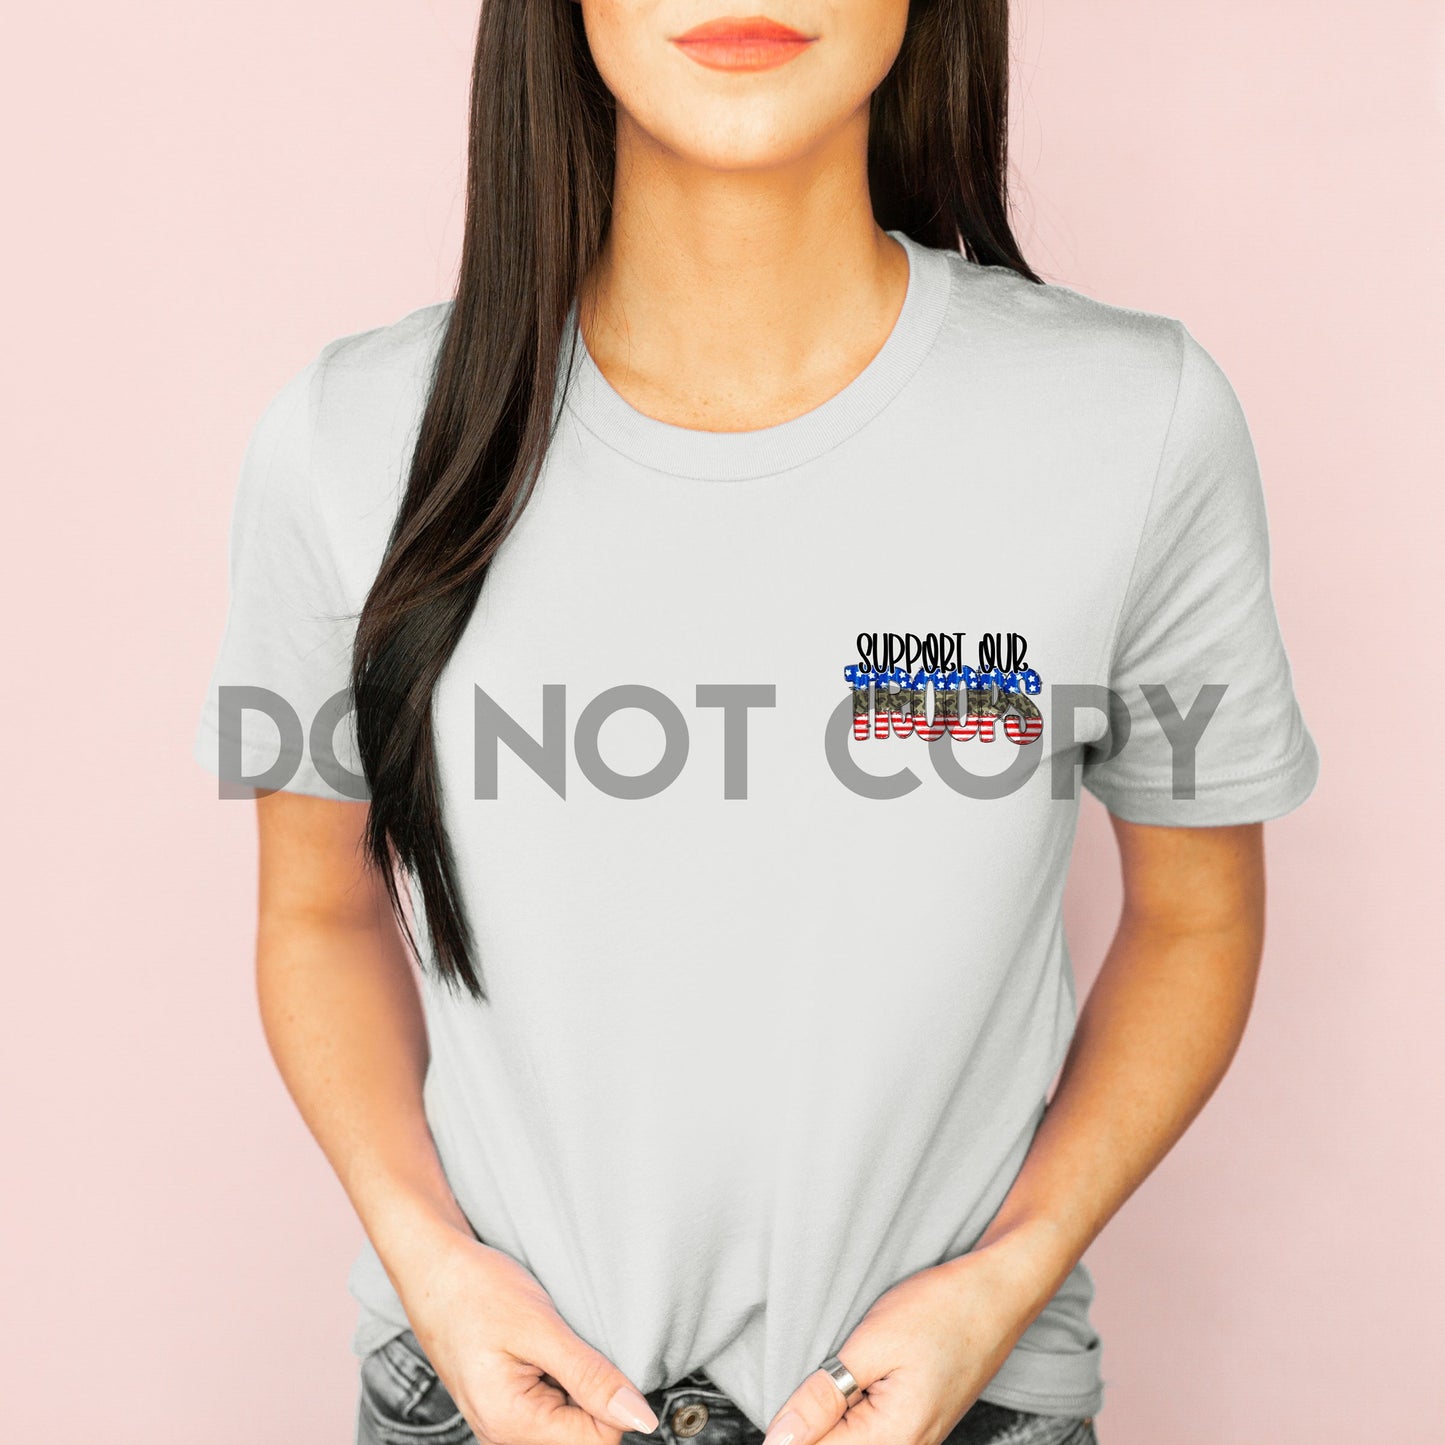 Support our Troops Pocket Size HIGH HEAT Full color Screen Print transfer